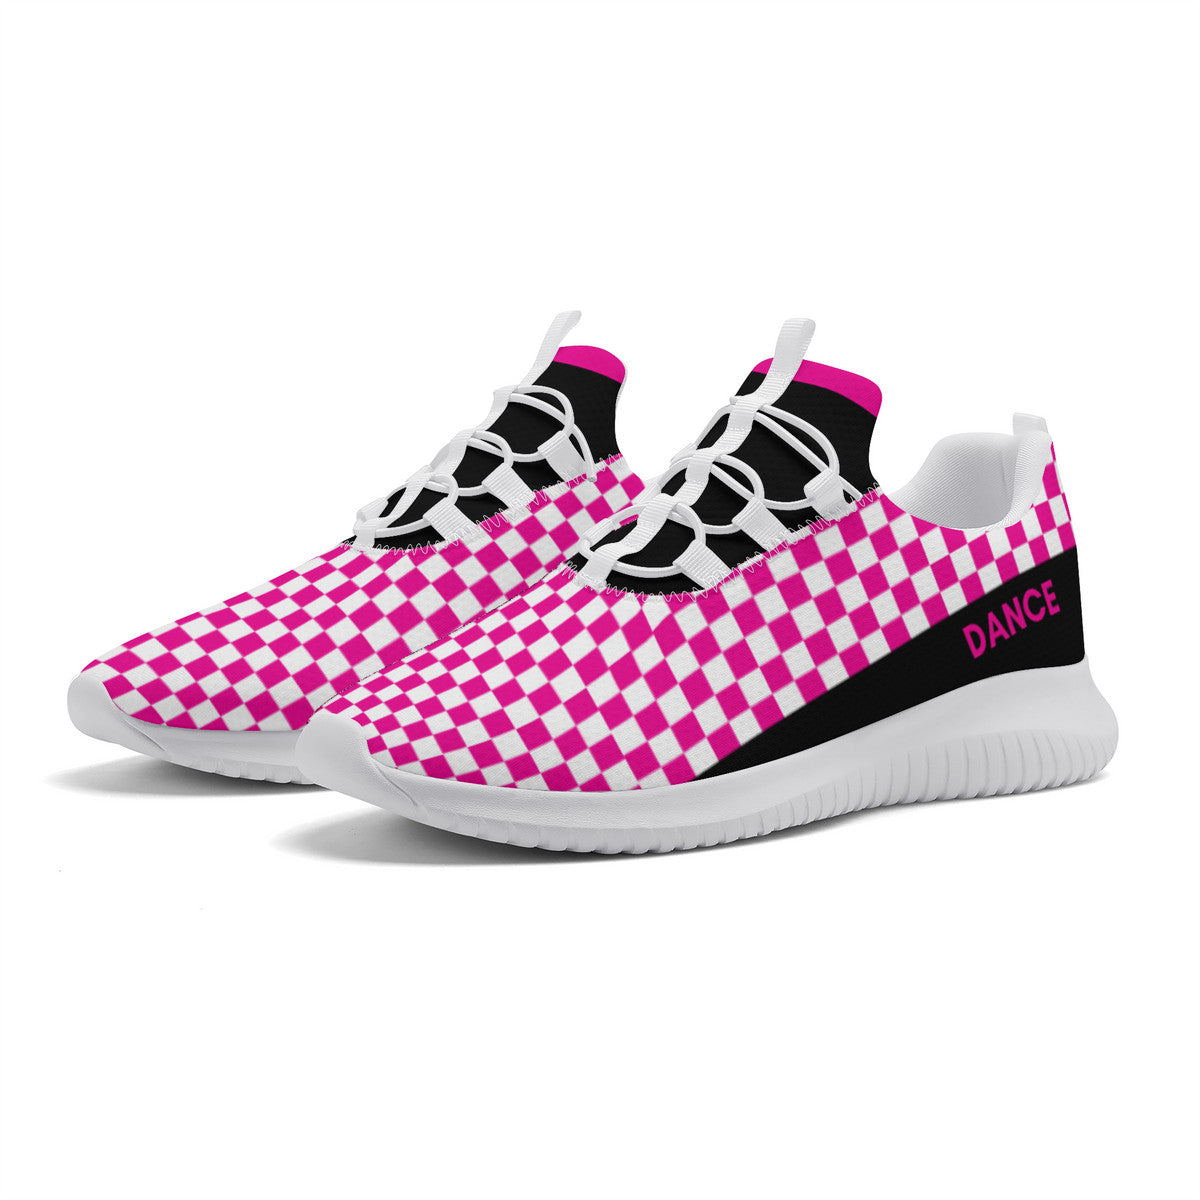 Dance Sneakers - Checkered Pink Dance Shoes